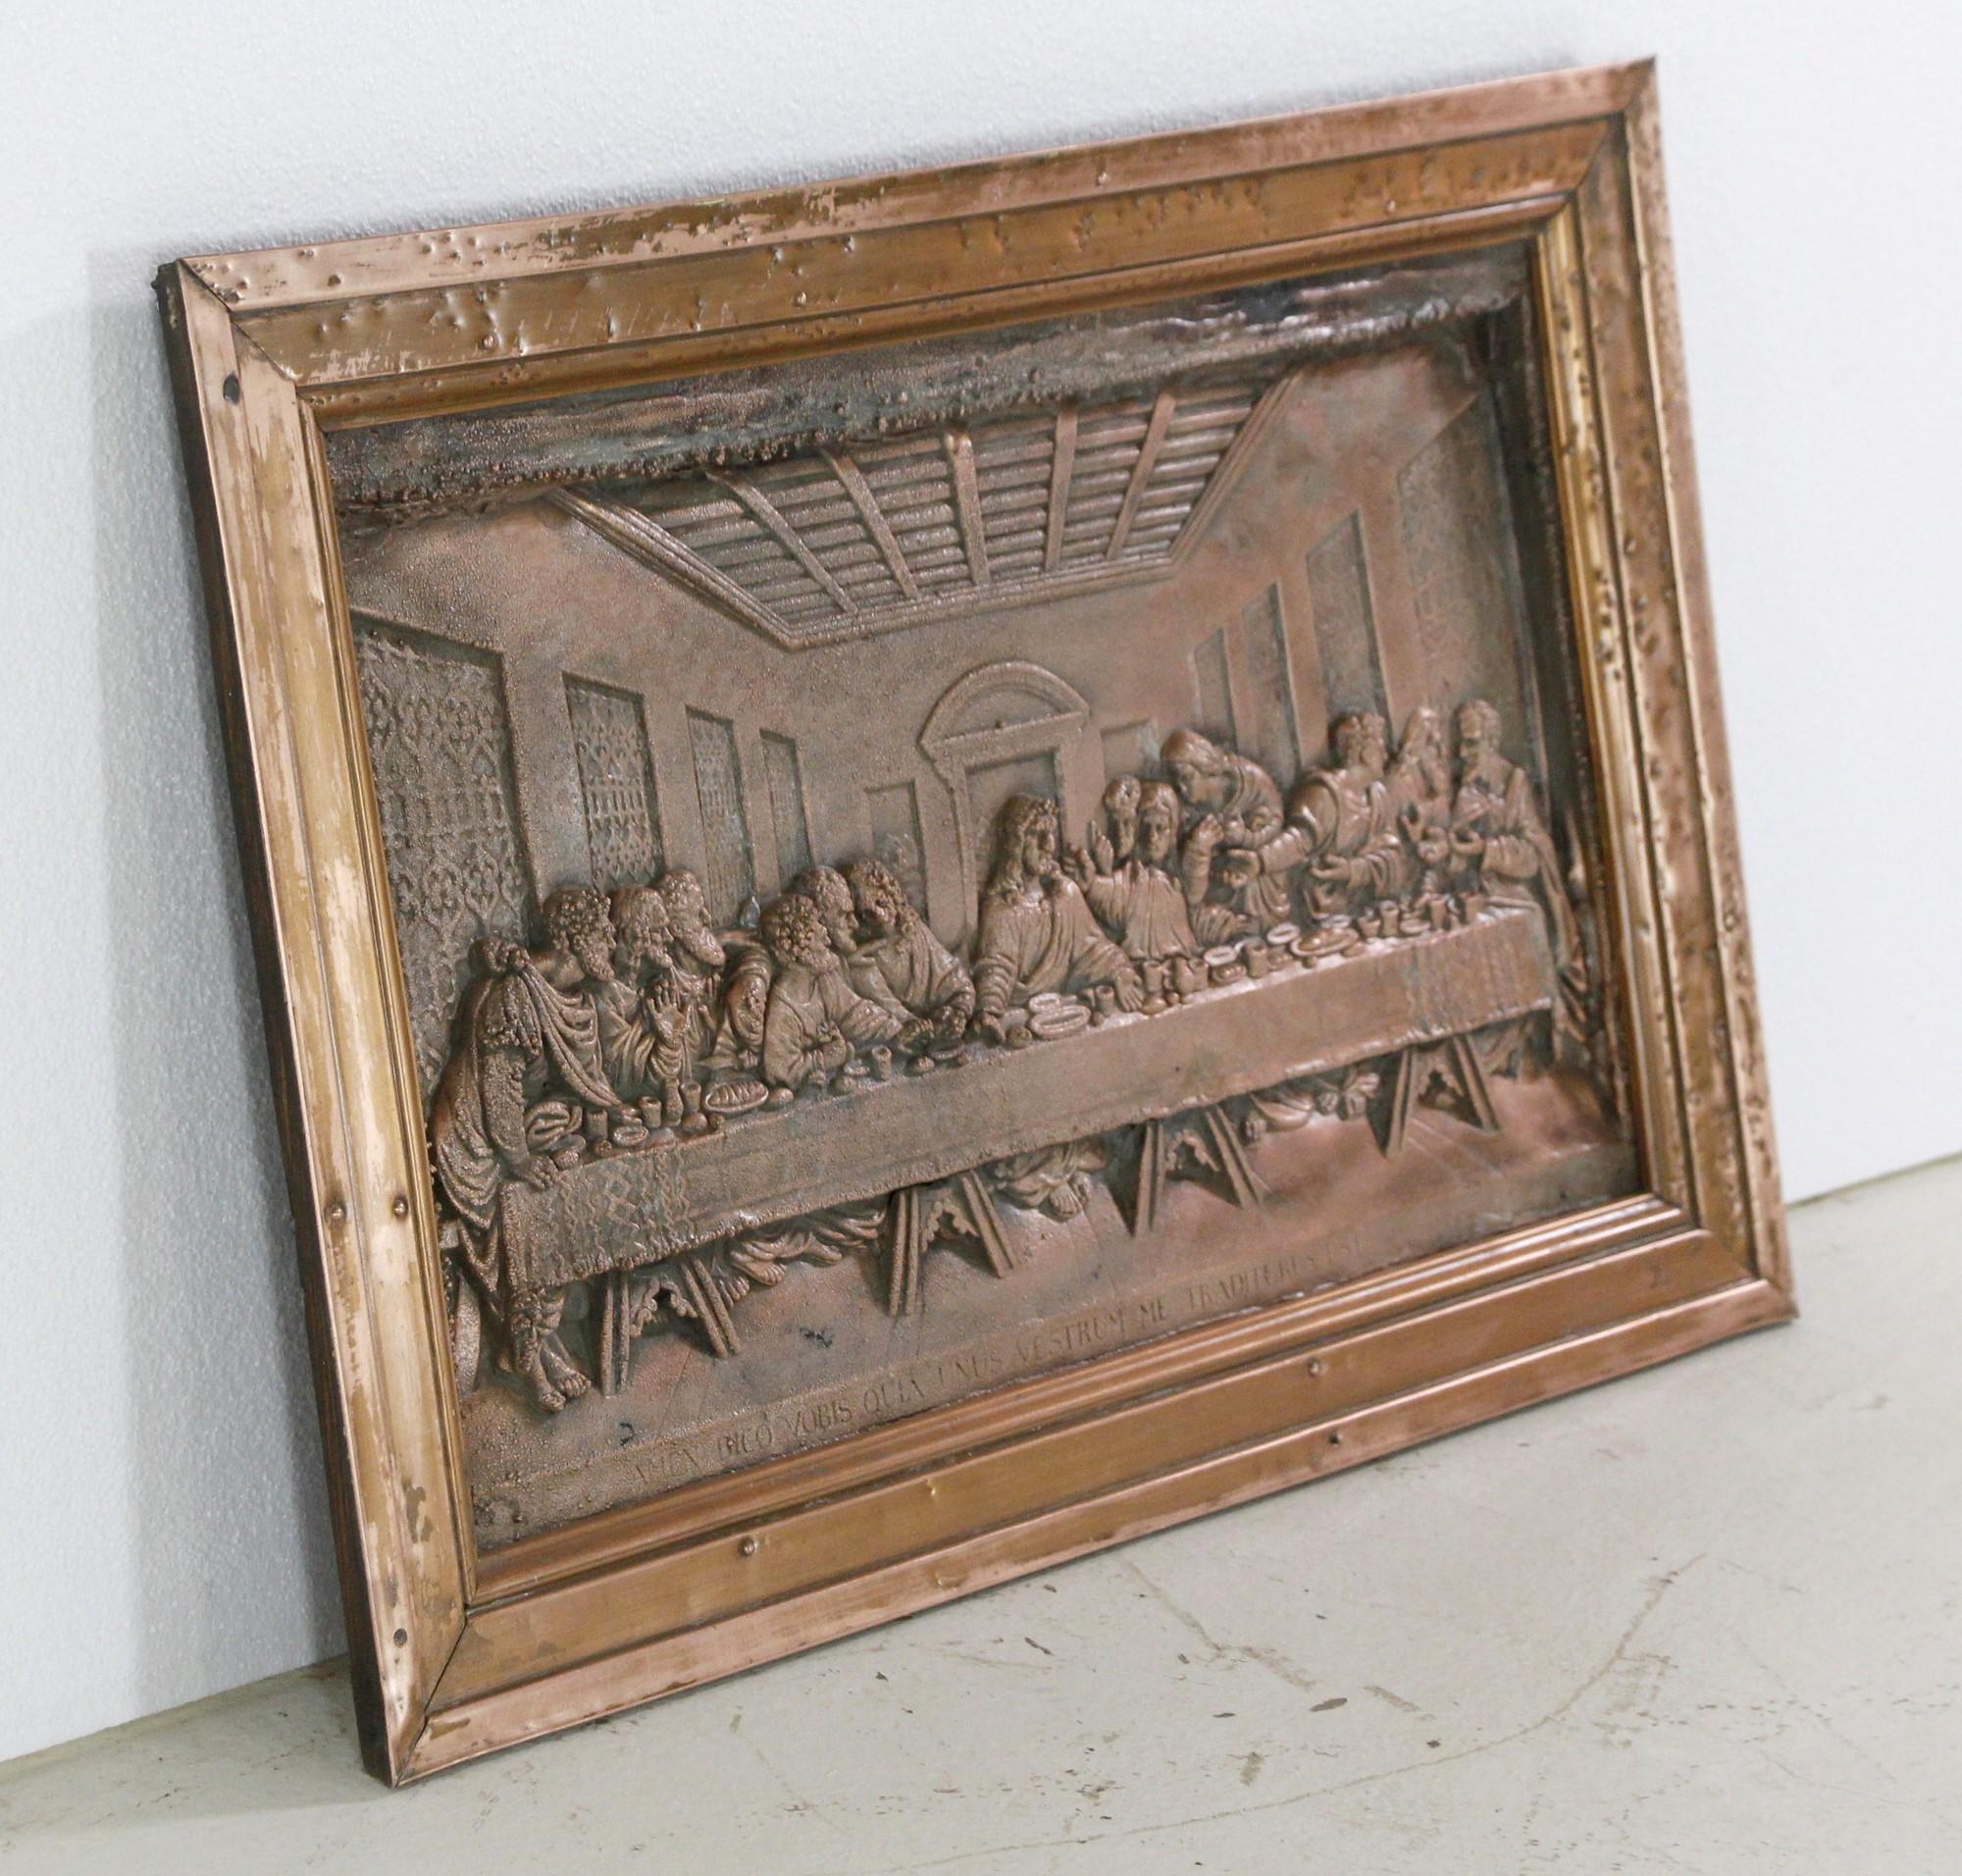 Depiction of the last supper made out of 3D pressed copper. Now mounted in retrieved early 20th century copper window molding from a Madison Ave building in Manhattan. Strung with a mounting wire ready to hang. This can be seen at our 400 Gilligan